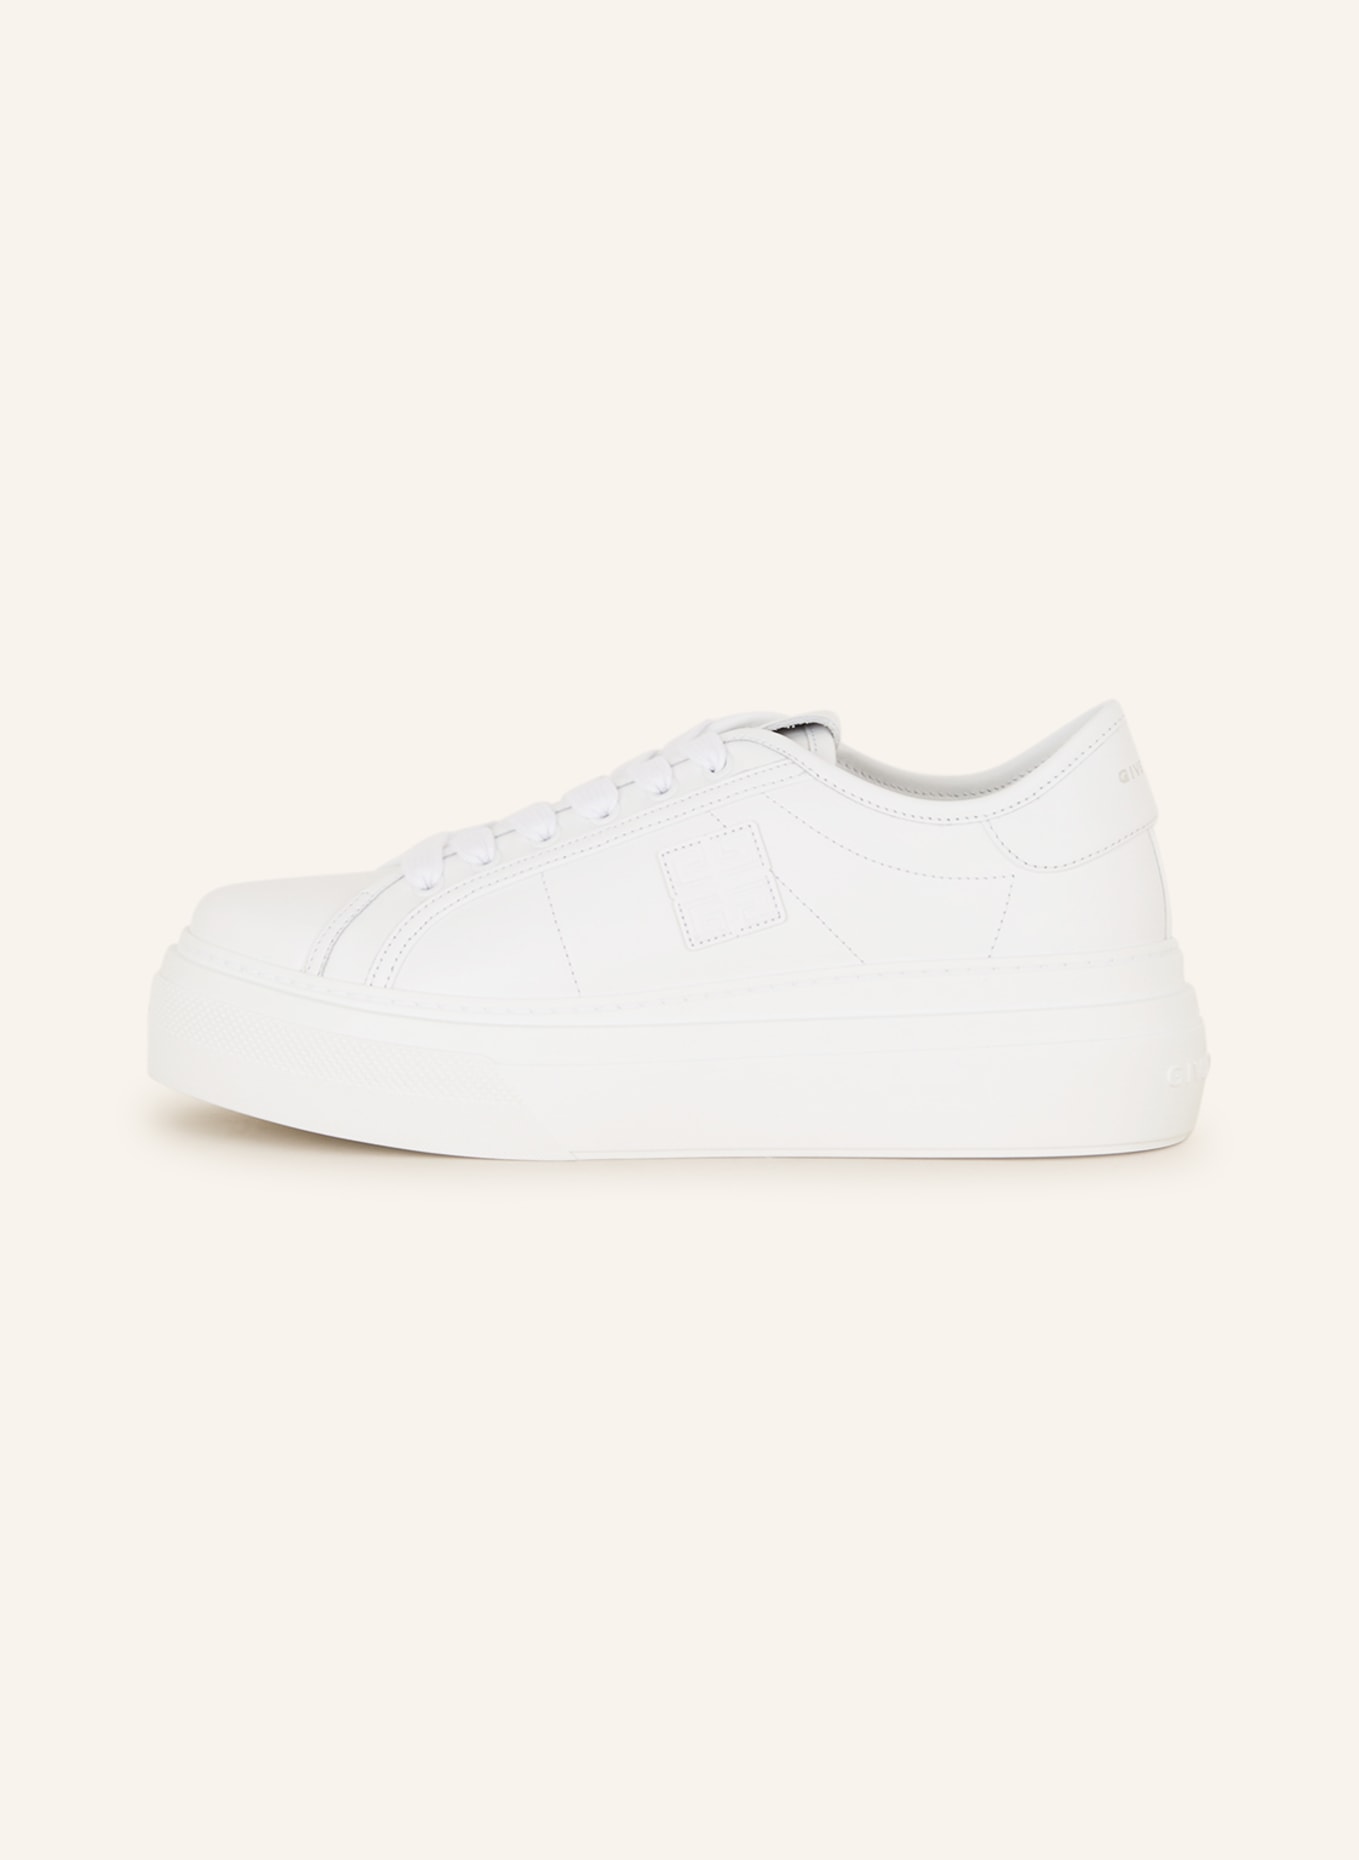 GIVENCHY Sneaker CITY, Farbe: WEISS (Bild 4)